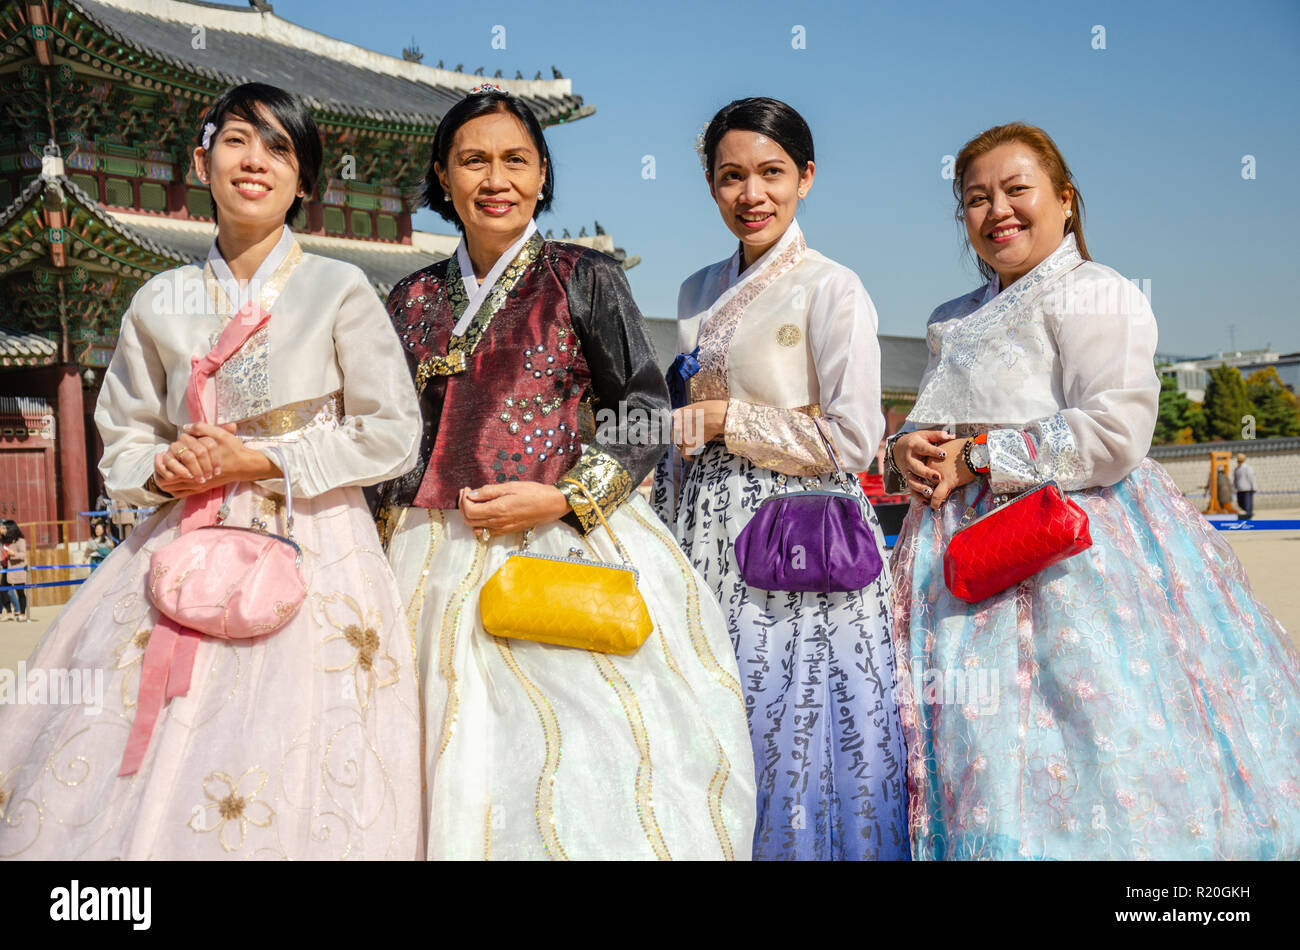 Group of friends pose for a picture at Gyeongbokgung Palace in Seoul, dressed in traditional Korean dress, the hanbok. Stock Photo